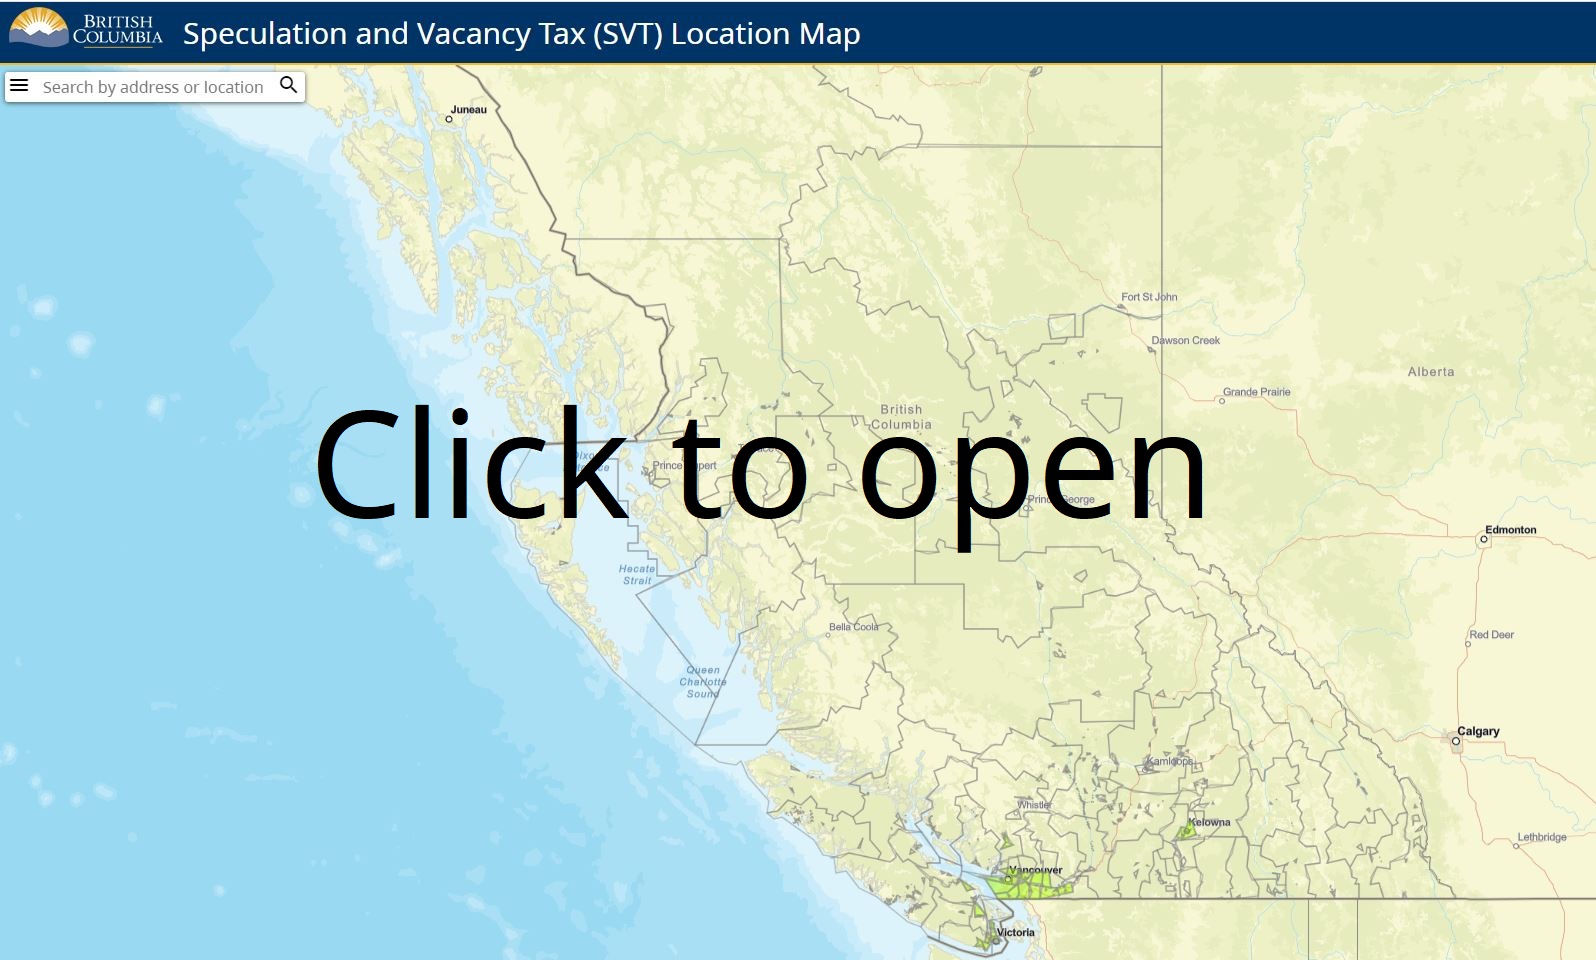 Link to open the speculation and vacancy tax location map